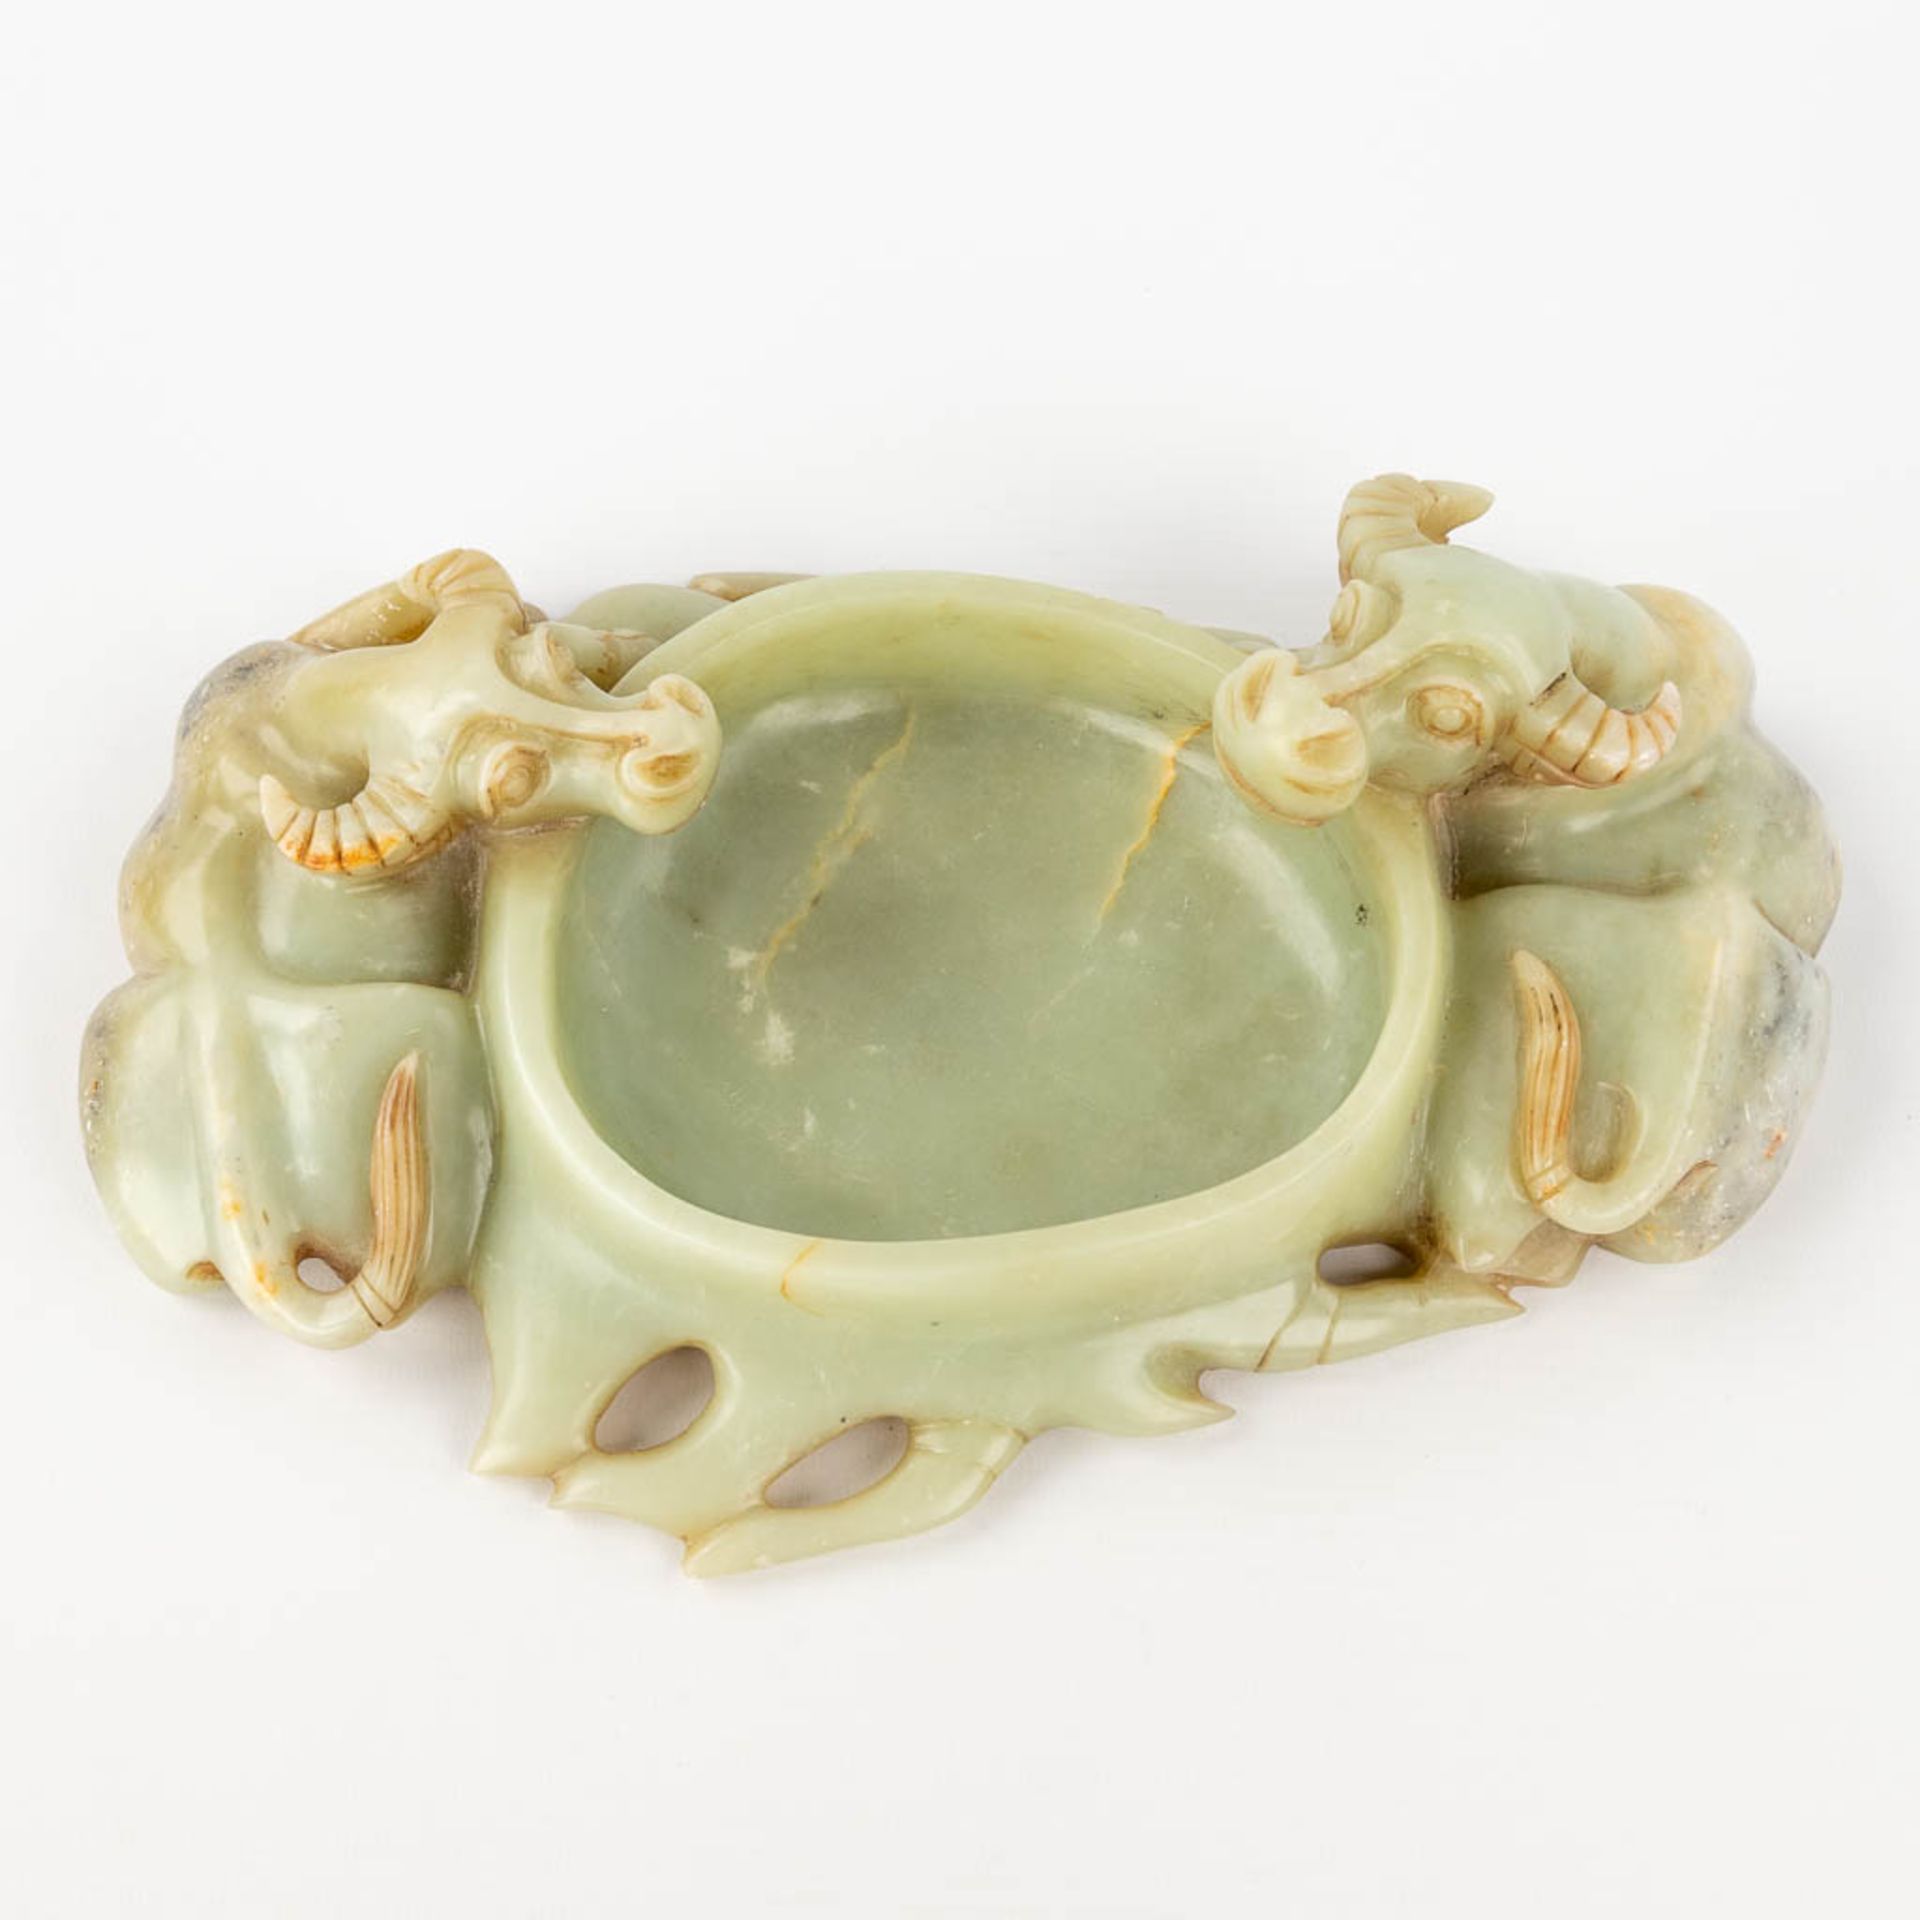 A Chinese brush washer, decorated with water buffalo, sculptured jade. (L: 18 x W: 28 x H: 8 cm)